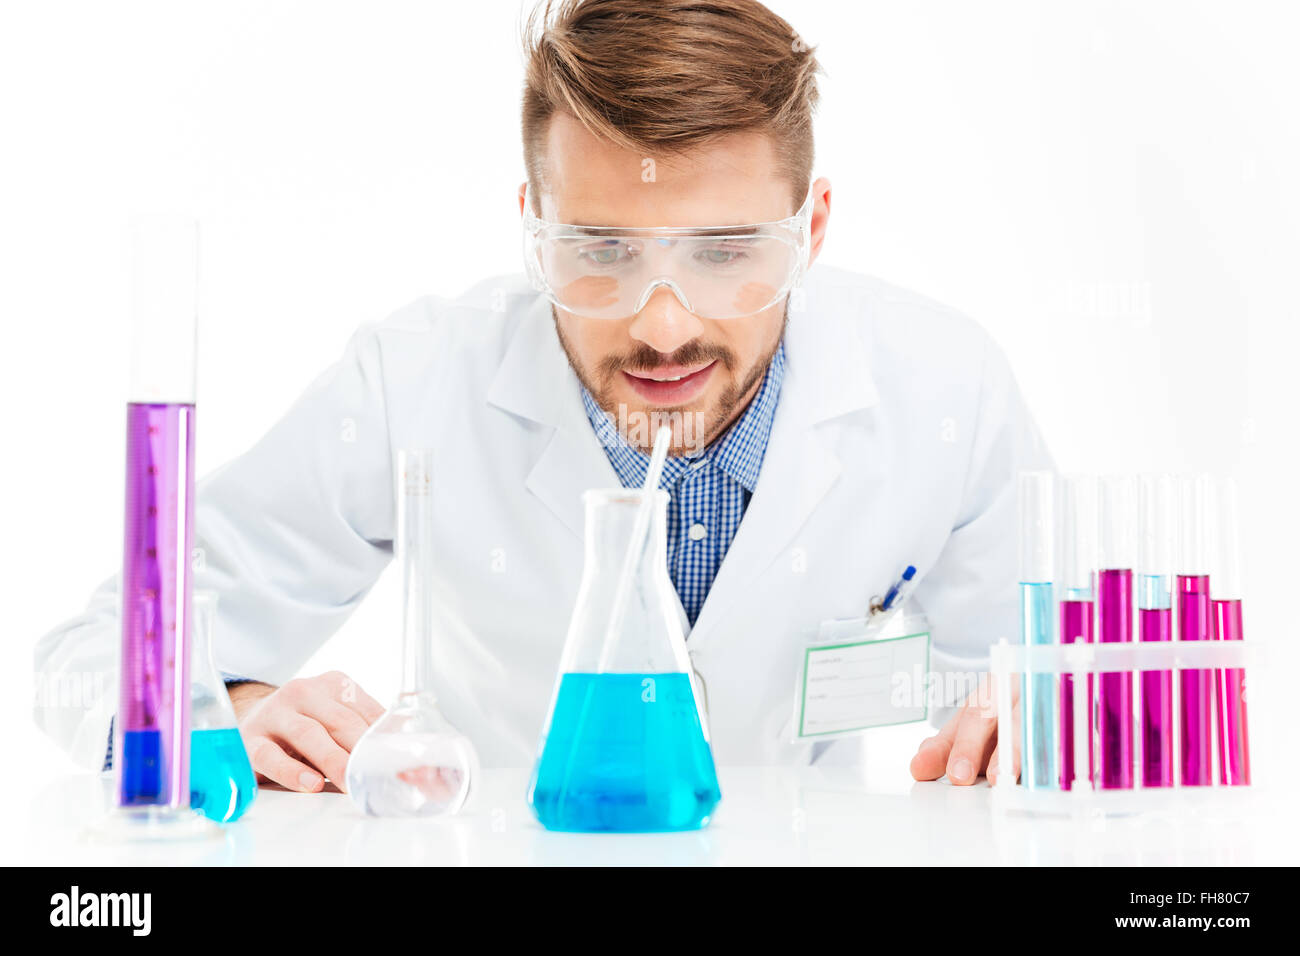 Man pouring chemicals isolated on a white background Stock Photo